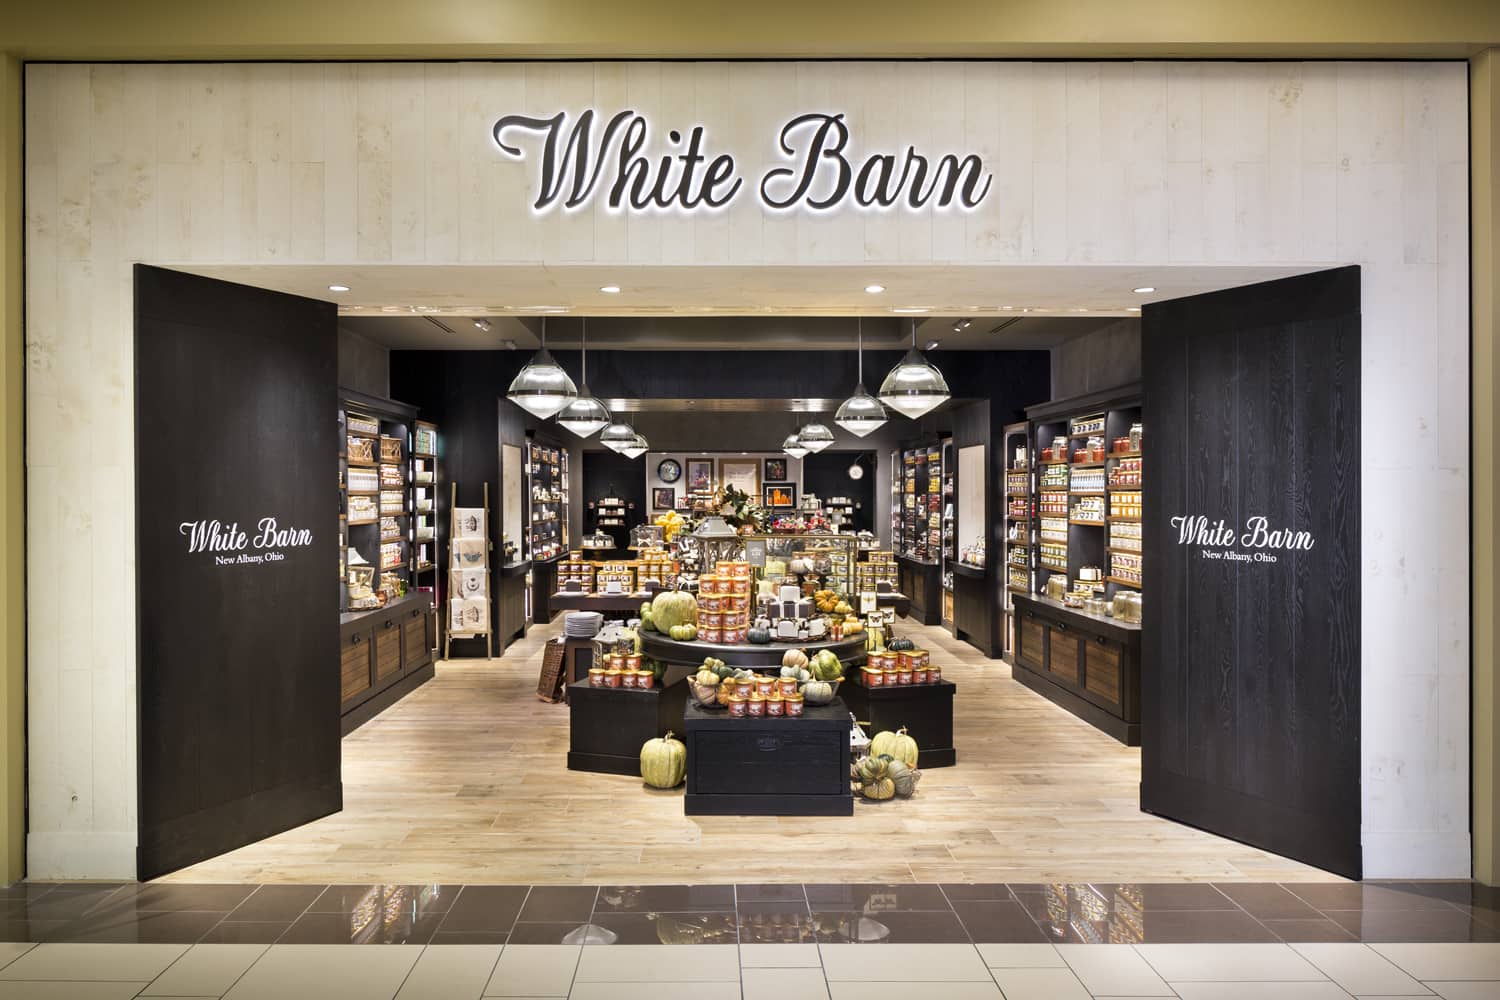 White Barn Candle Co.